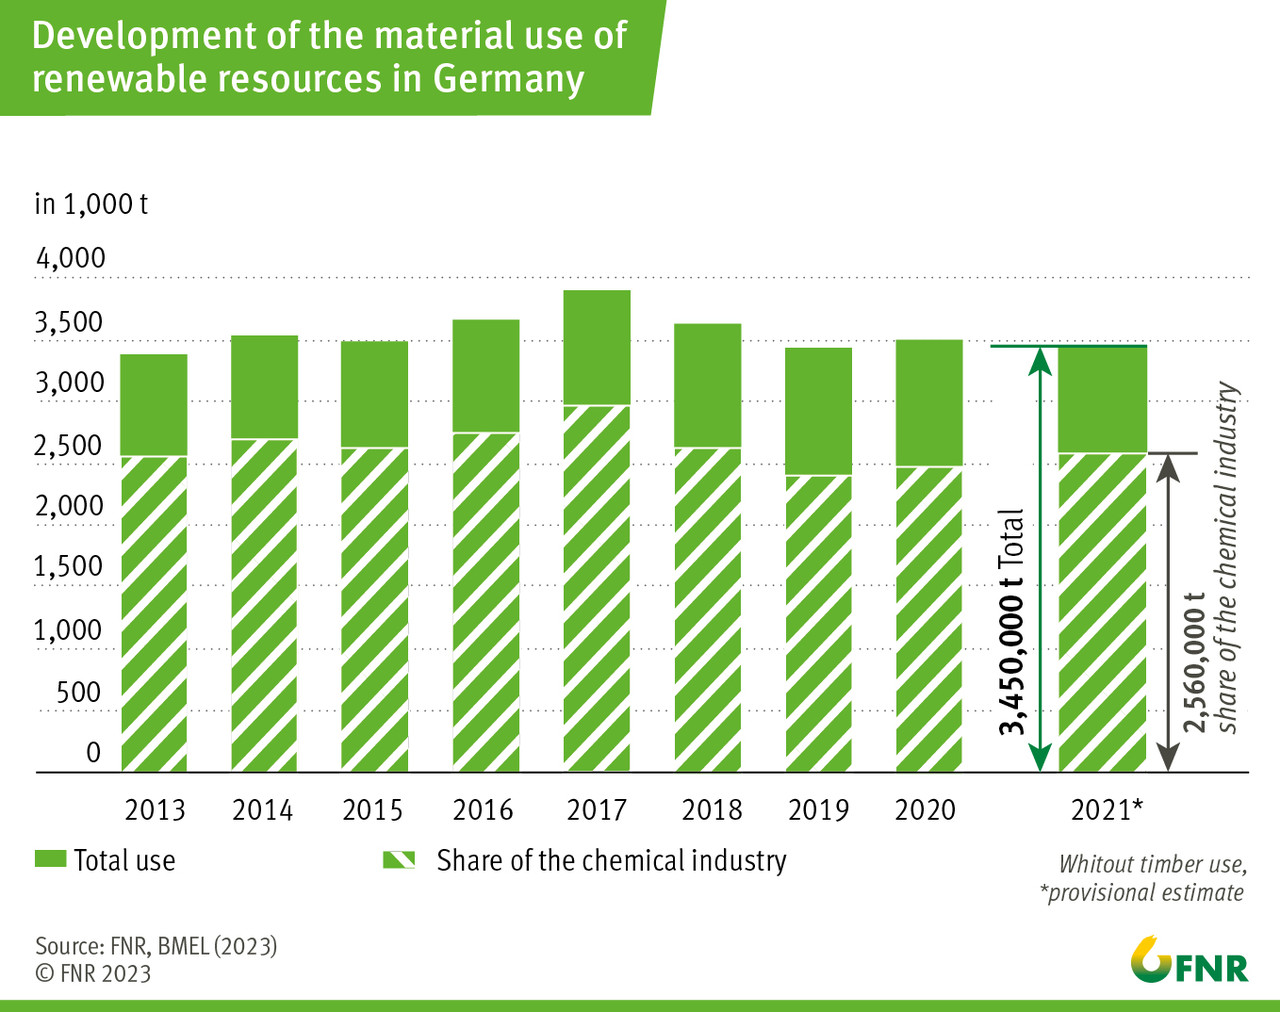 Development of the material use of renewable resources in Germany